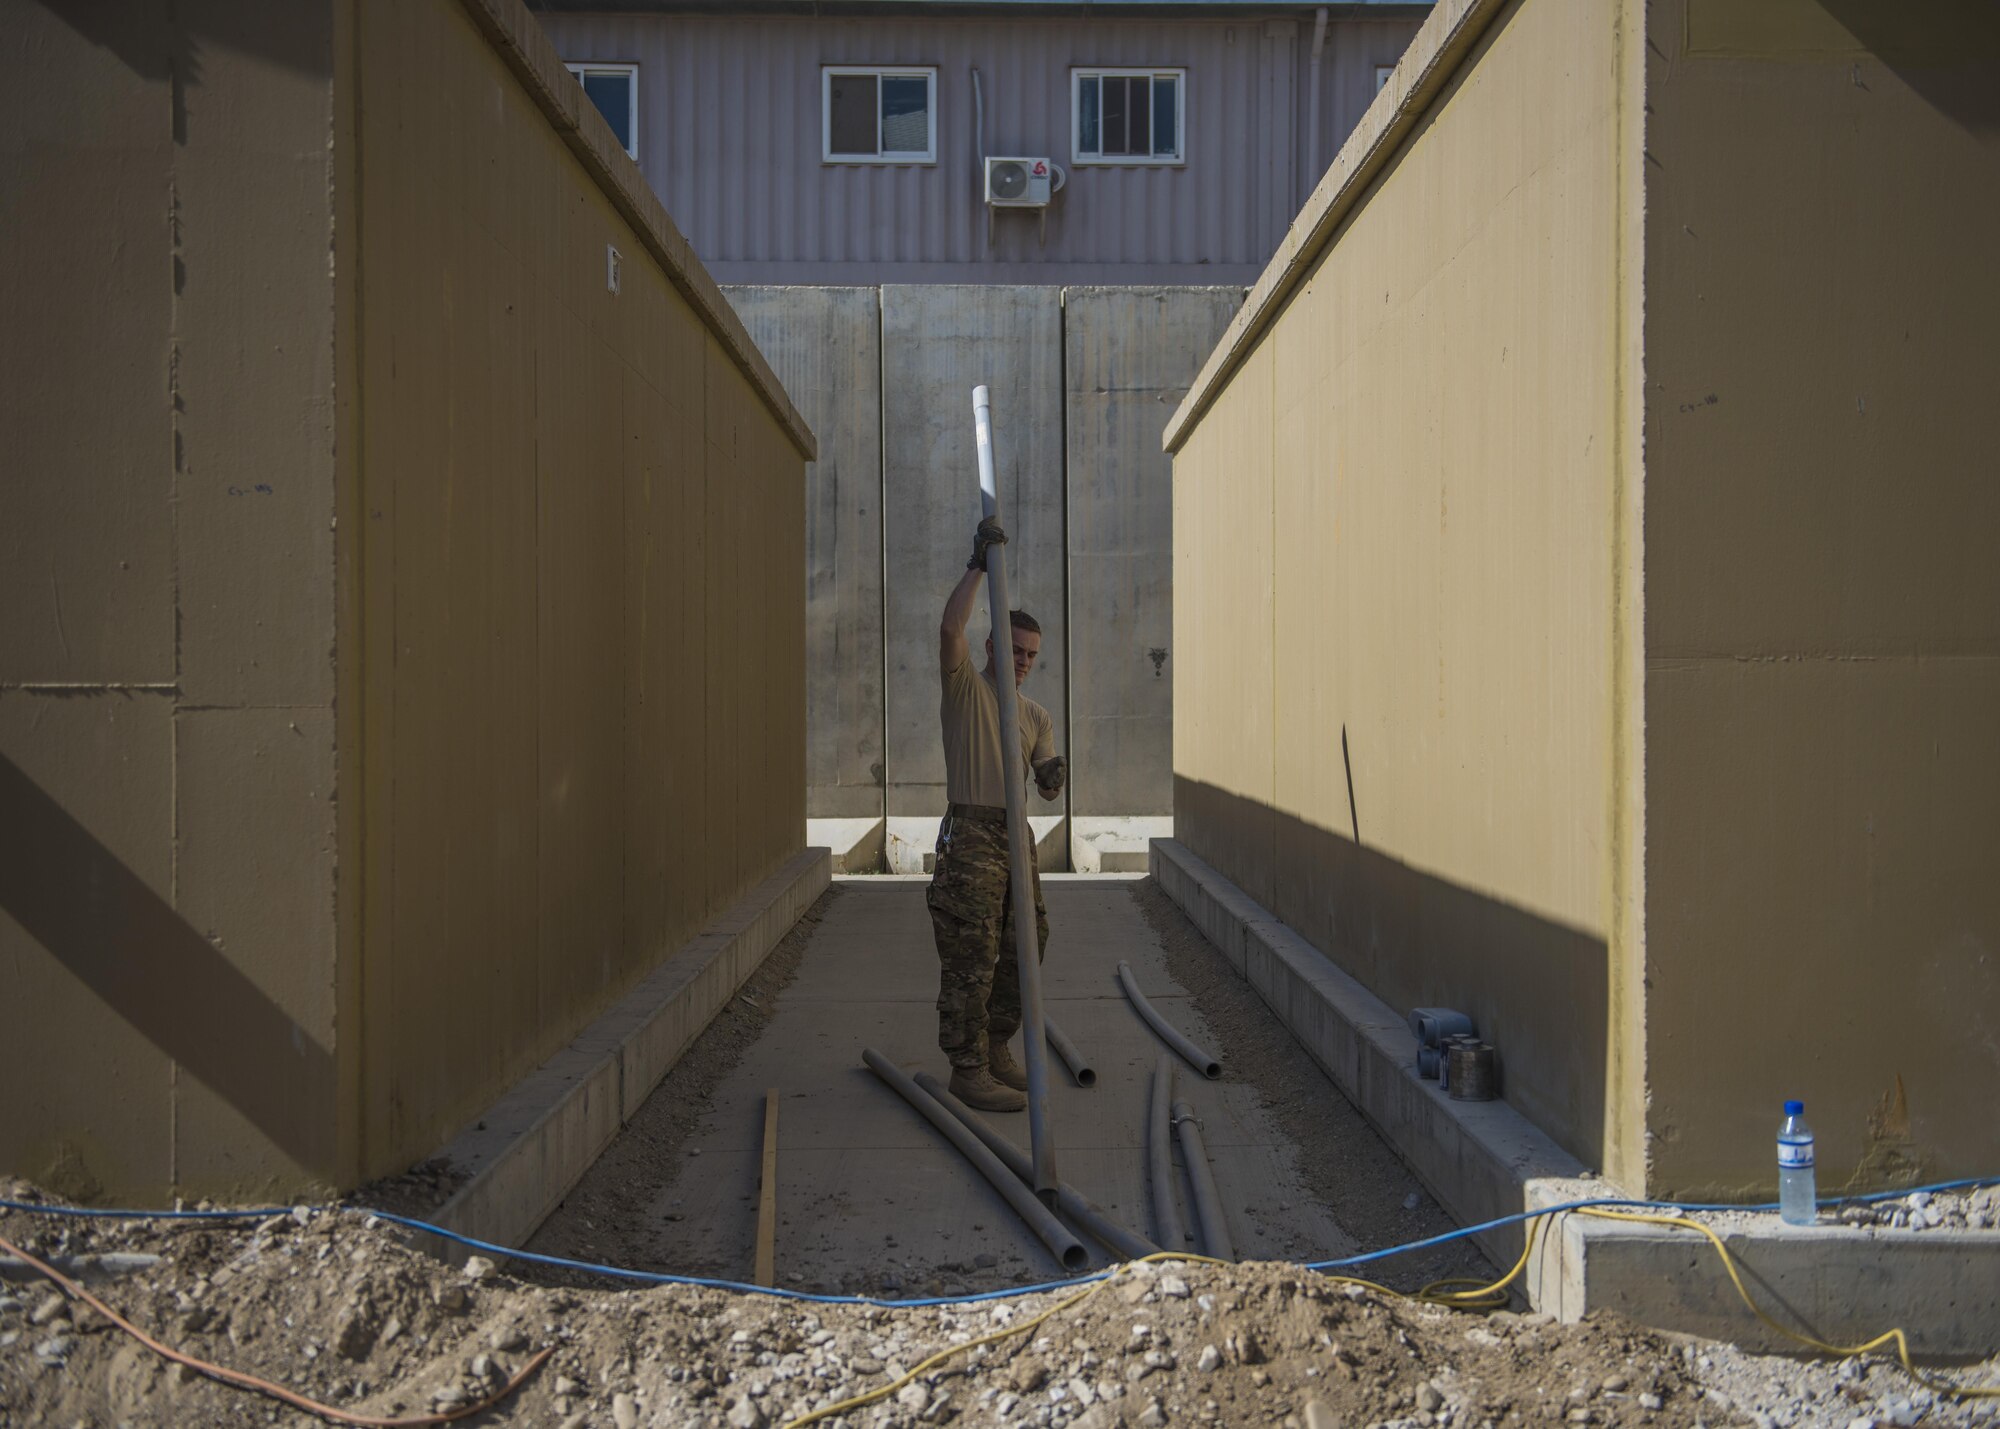 Staff Sgt. Colin Cardwell, 455th Expeditionary Civil Engineer Squadron electrical journeyman, measures out polyvinyl chloride (PVC) to construct piping for electrical wiring, Bagram Airfield, Afghanistan, Aug. 31, 2016. PVC protects underground wiring from environmental elements. (U.S. Air Force photo by Senior Airman Justyn M. Freeman)